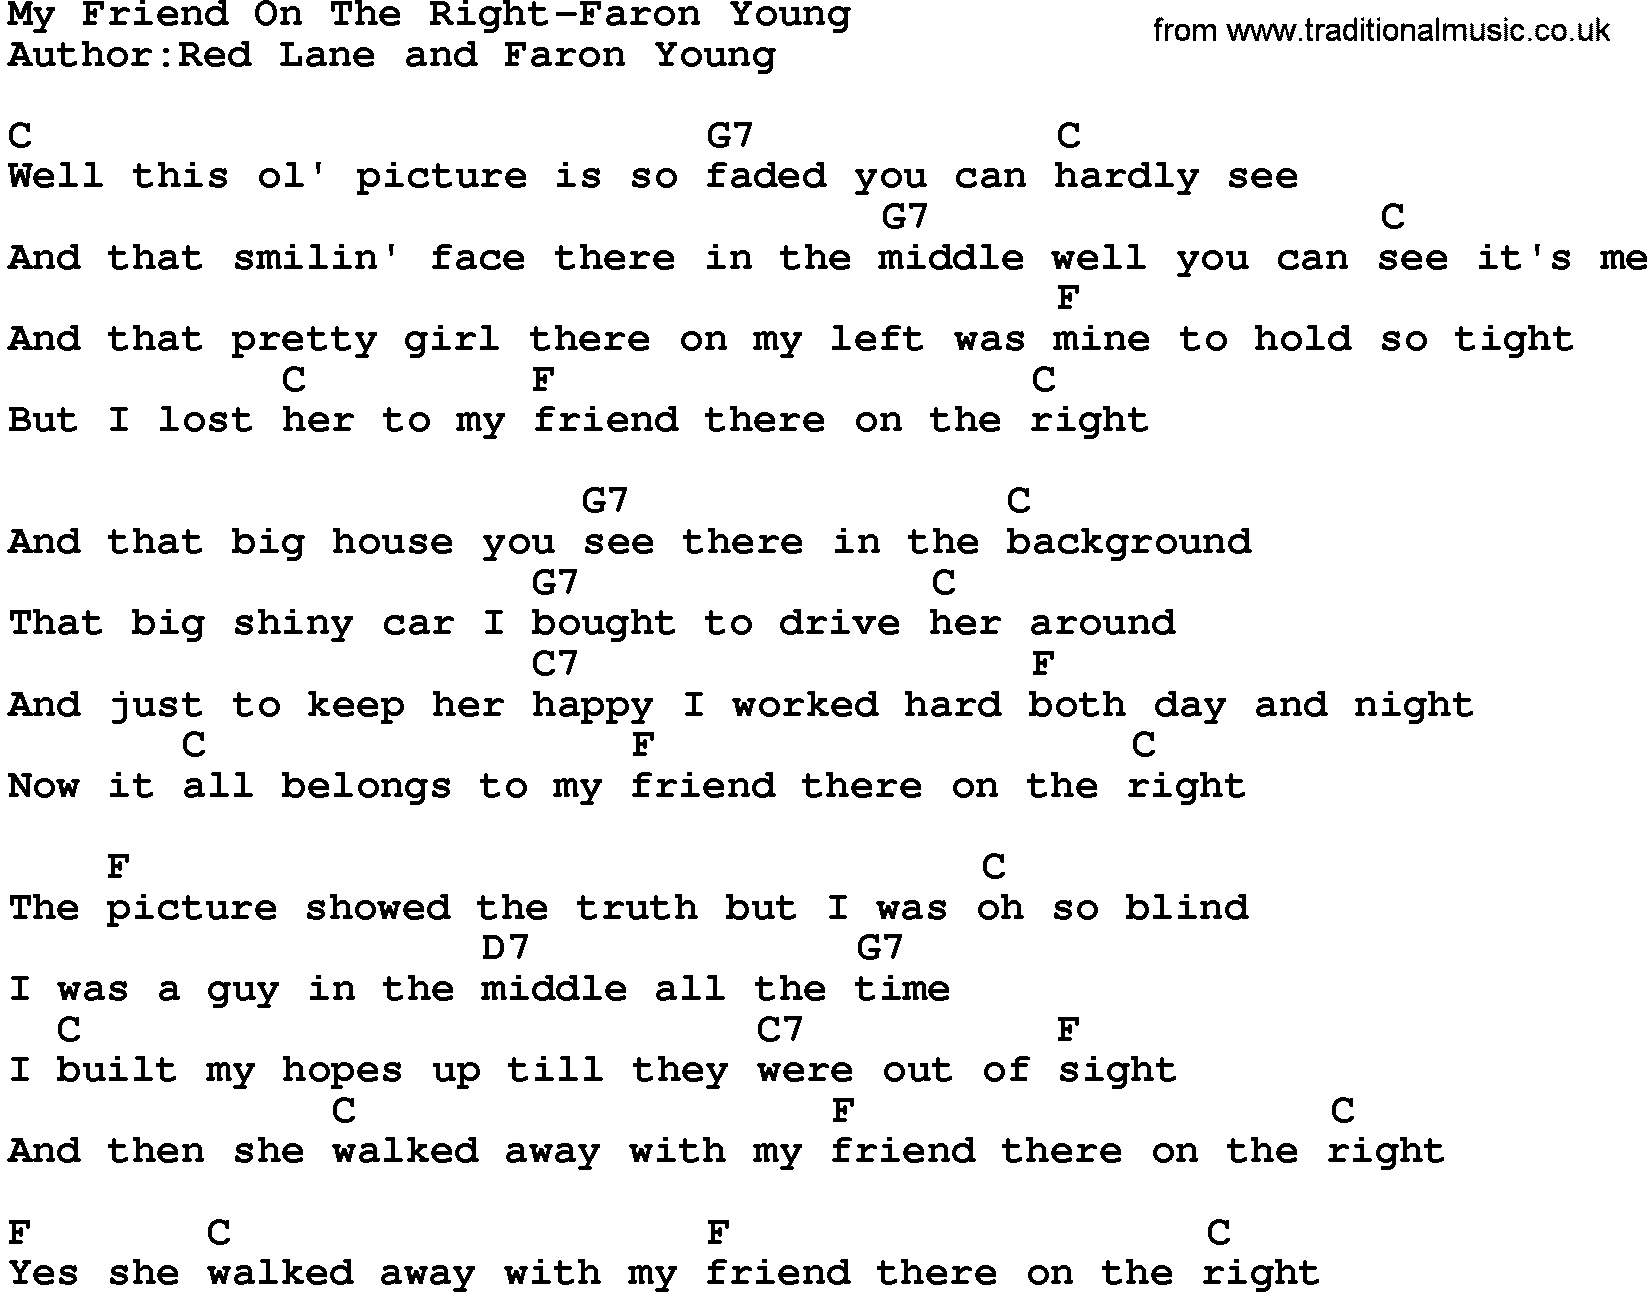 Country music song: My Friend On The Right-Faron Young lyrics and chords